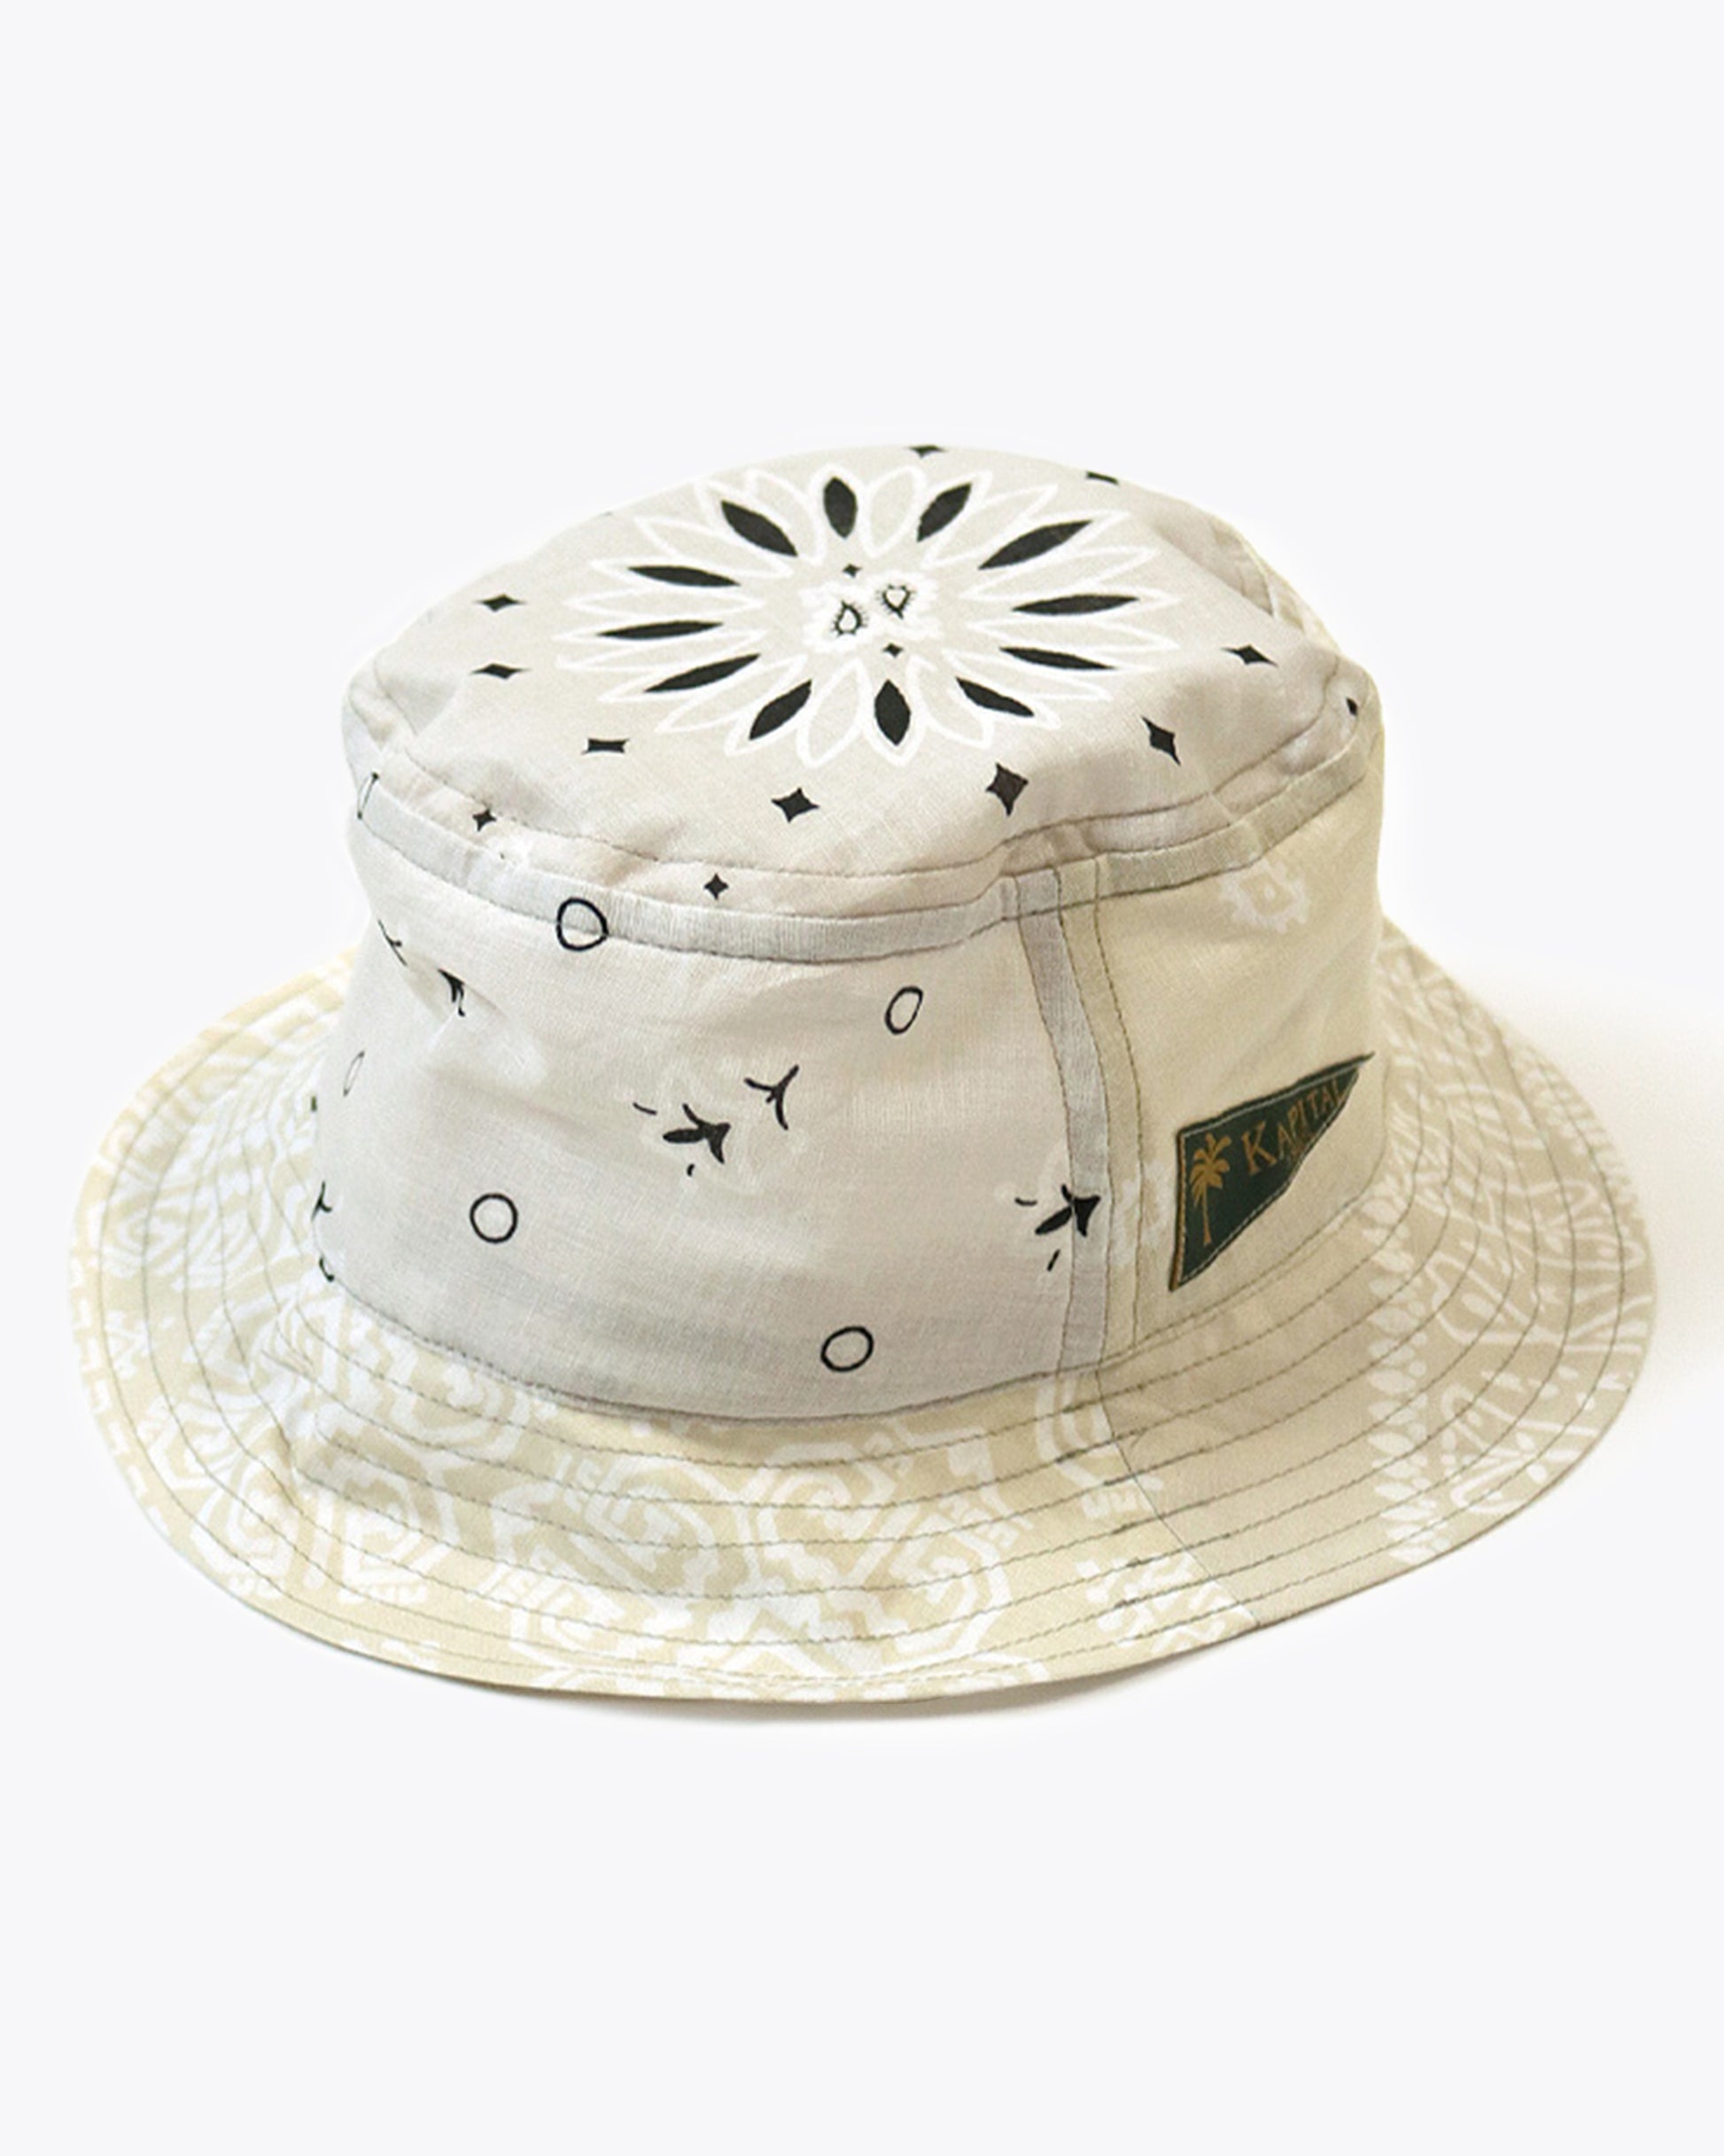 A colorful bucket hat made from vintage bandana patchwork fabric.